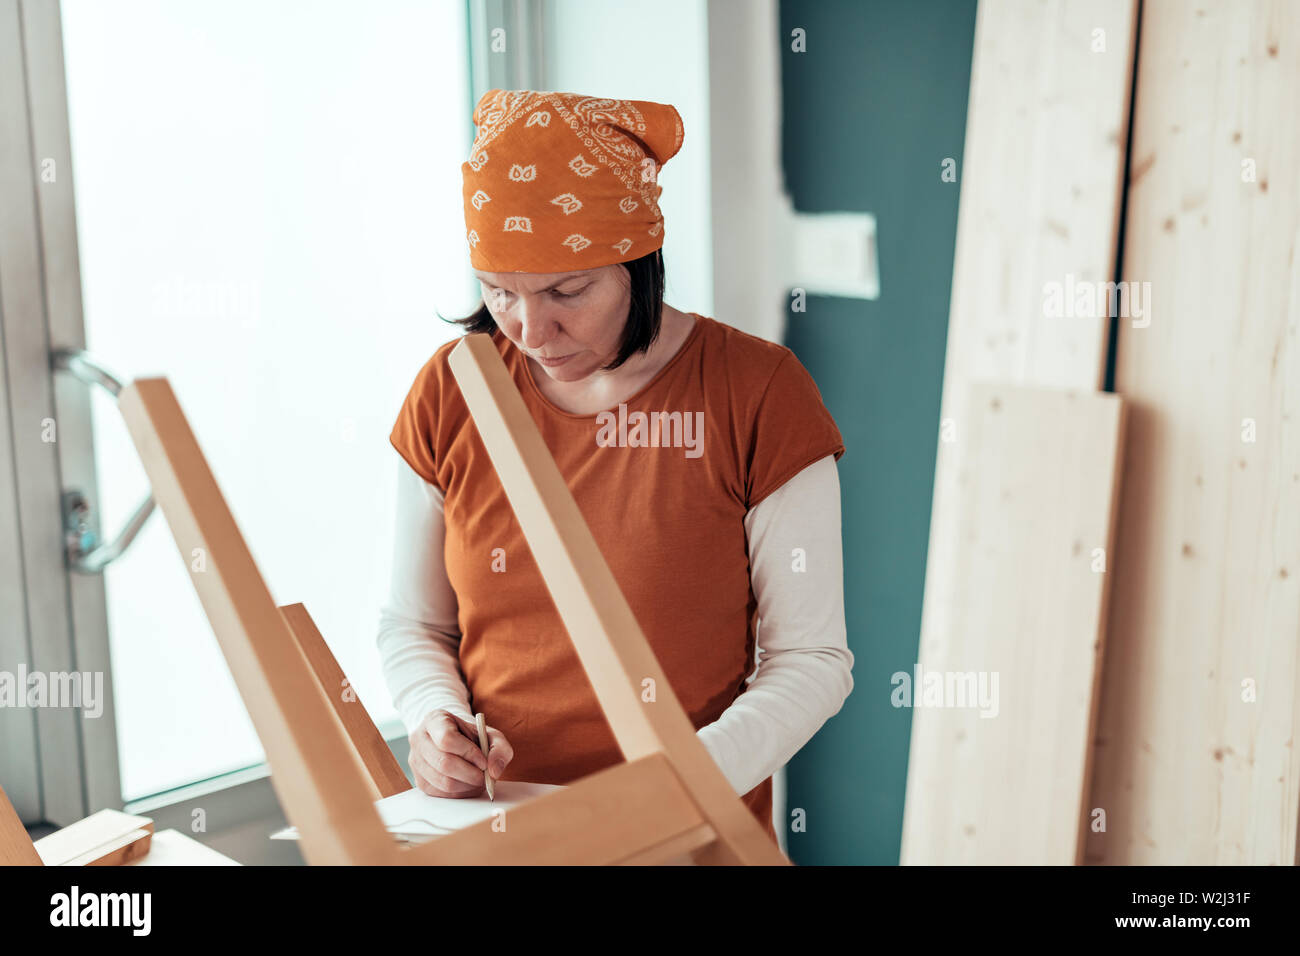 Female carpenter repairing wooden chair seat in small business woodwork workshop Stock Photo